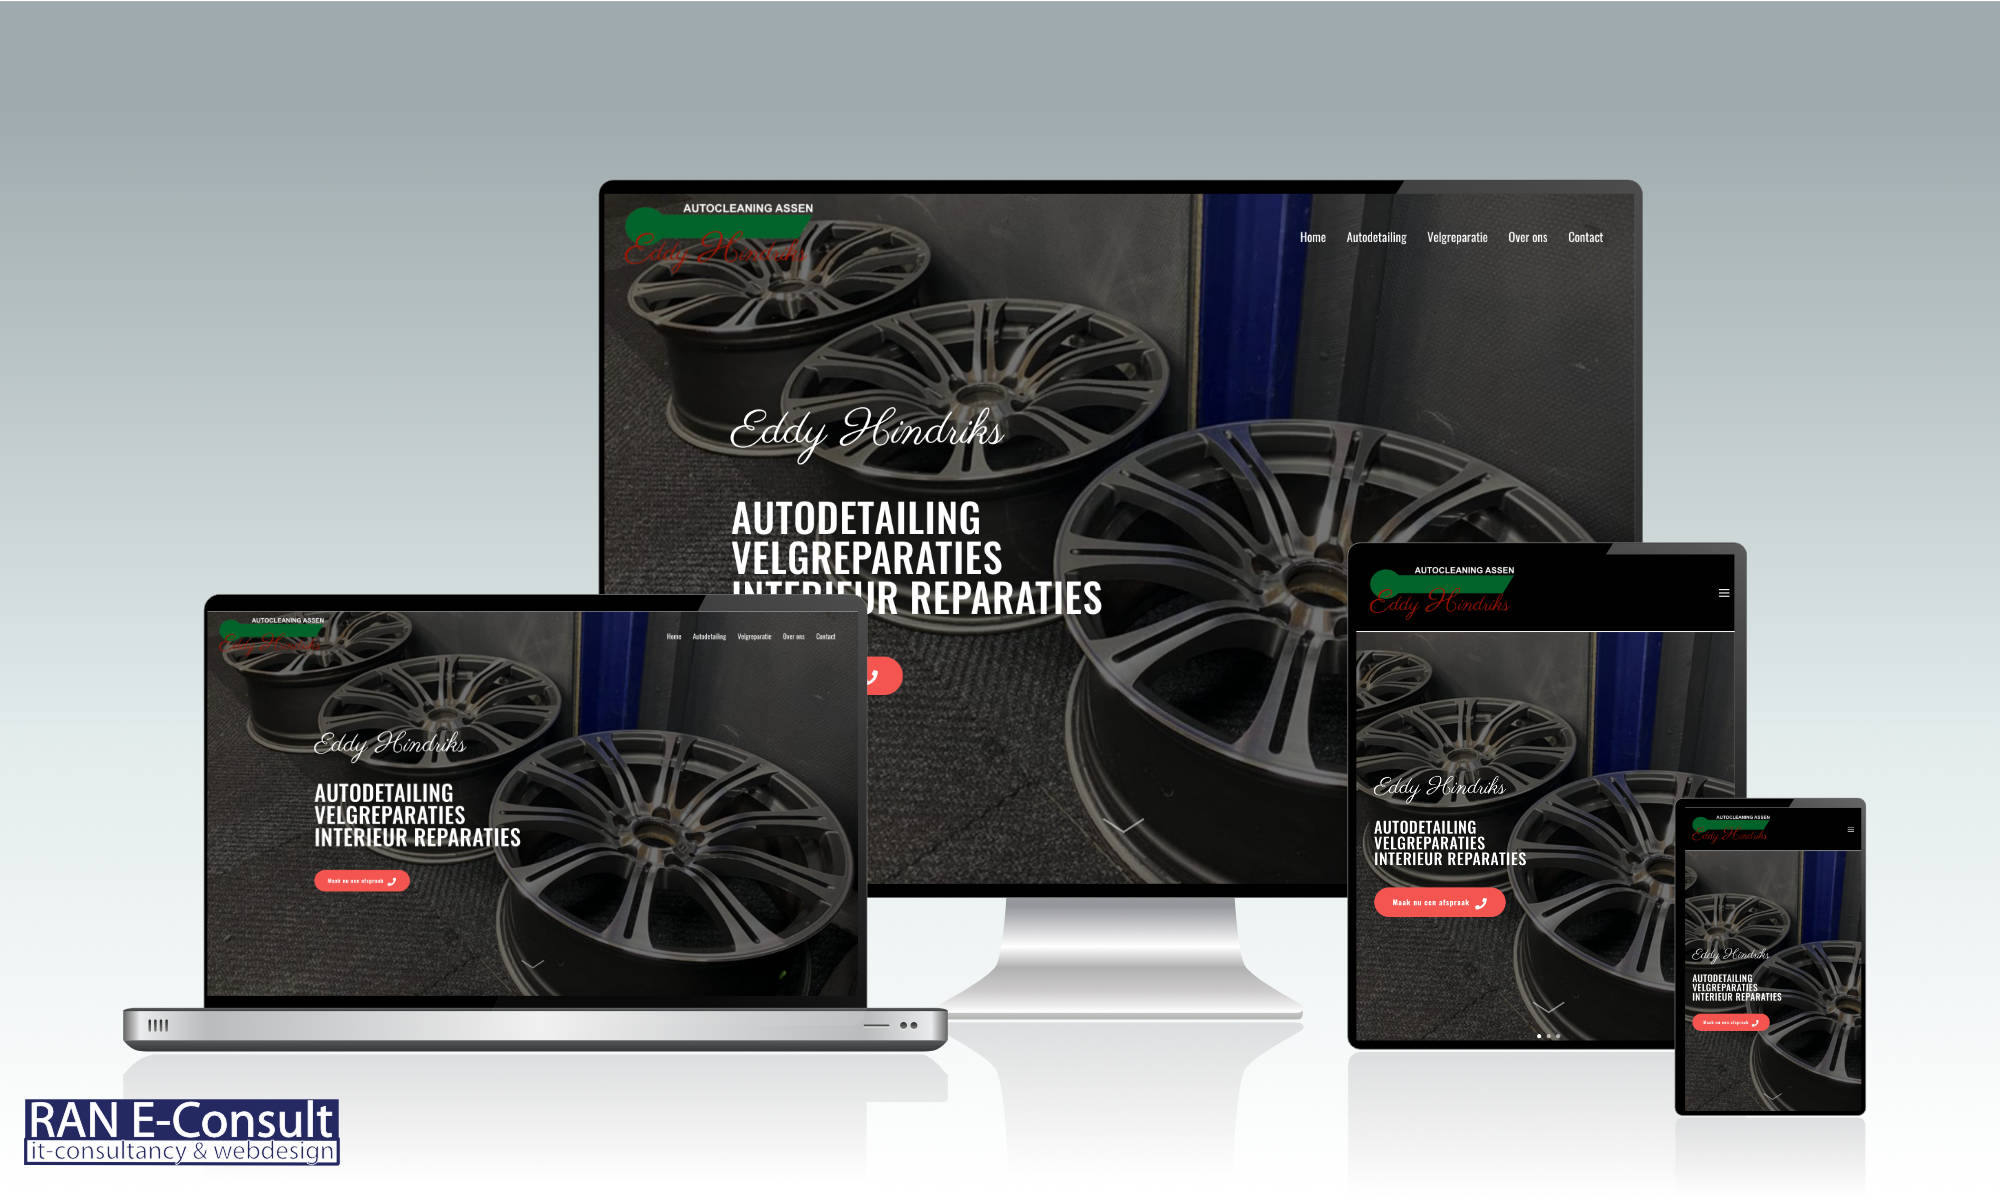 RAN E-Consult Website Hindriks Autocleaning Assen